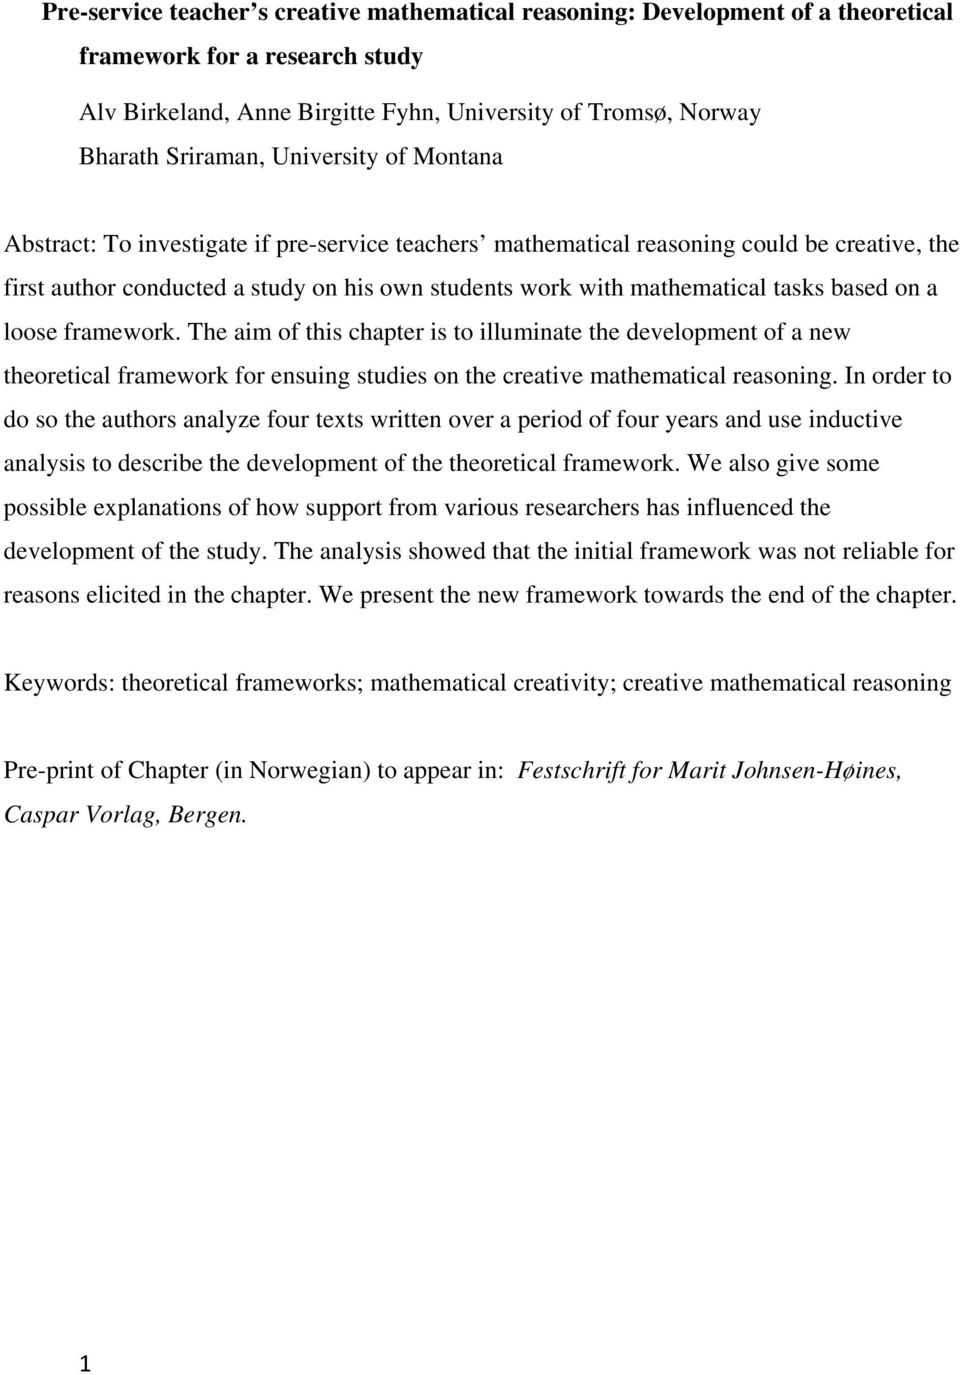 based on a loose framework. The aim of this chapter is to illuminate the development of a new theoretical framework for ensuing studies on the creative mathematical reasoning.